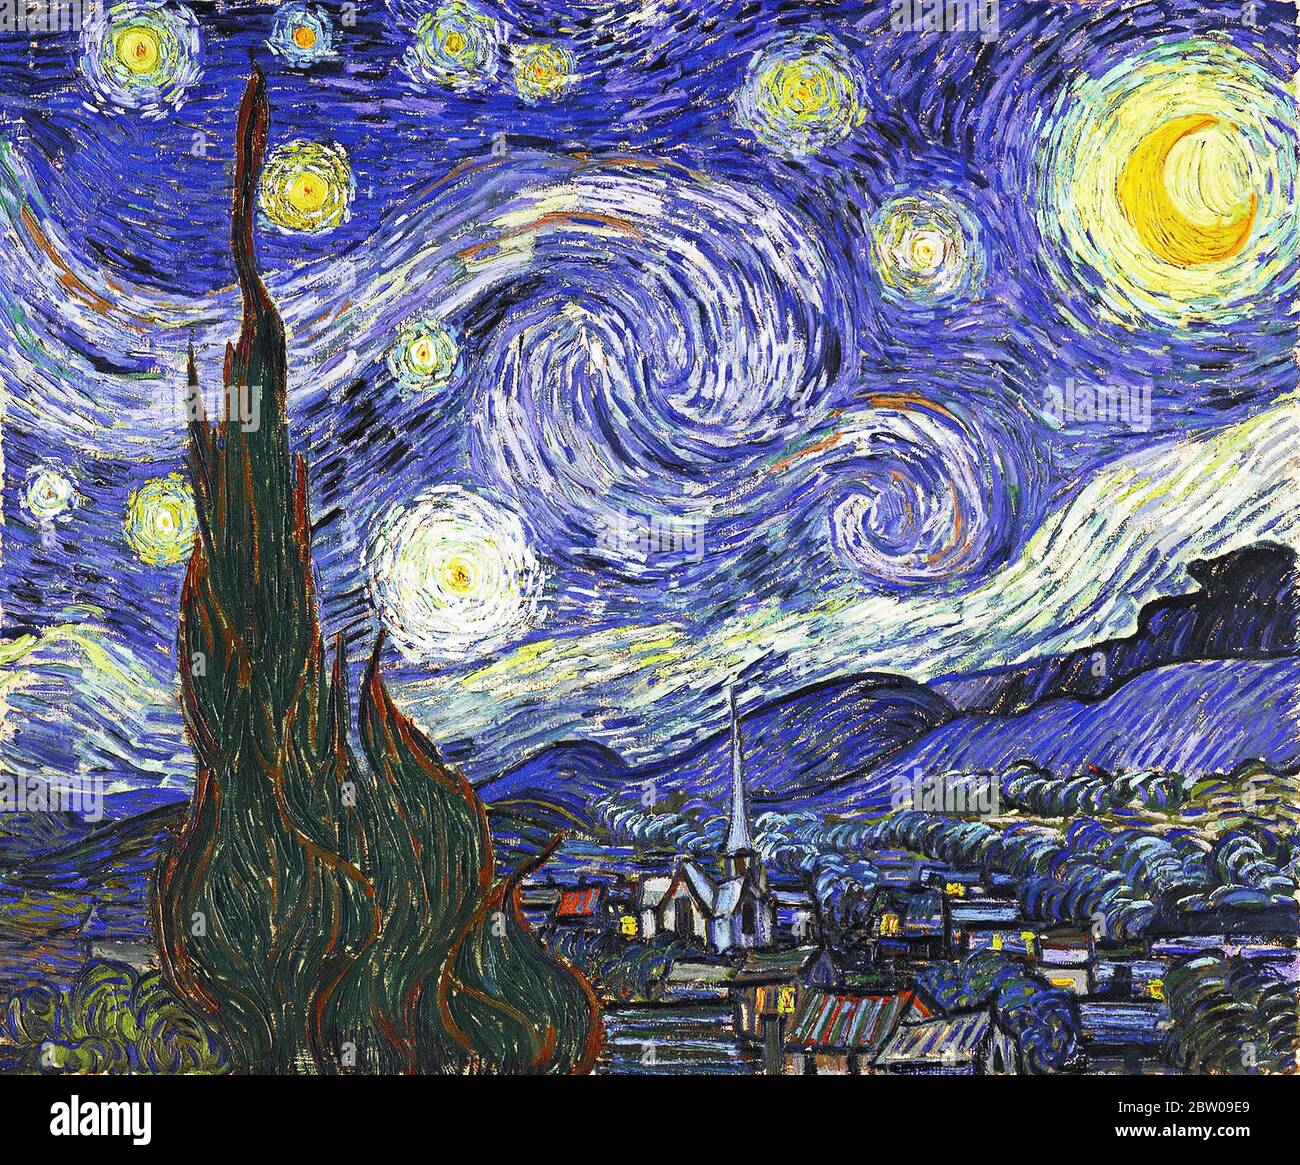 The Starry Night by Van Gogh 1889, Museum of Modern Art de New York Banque D'Images